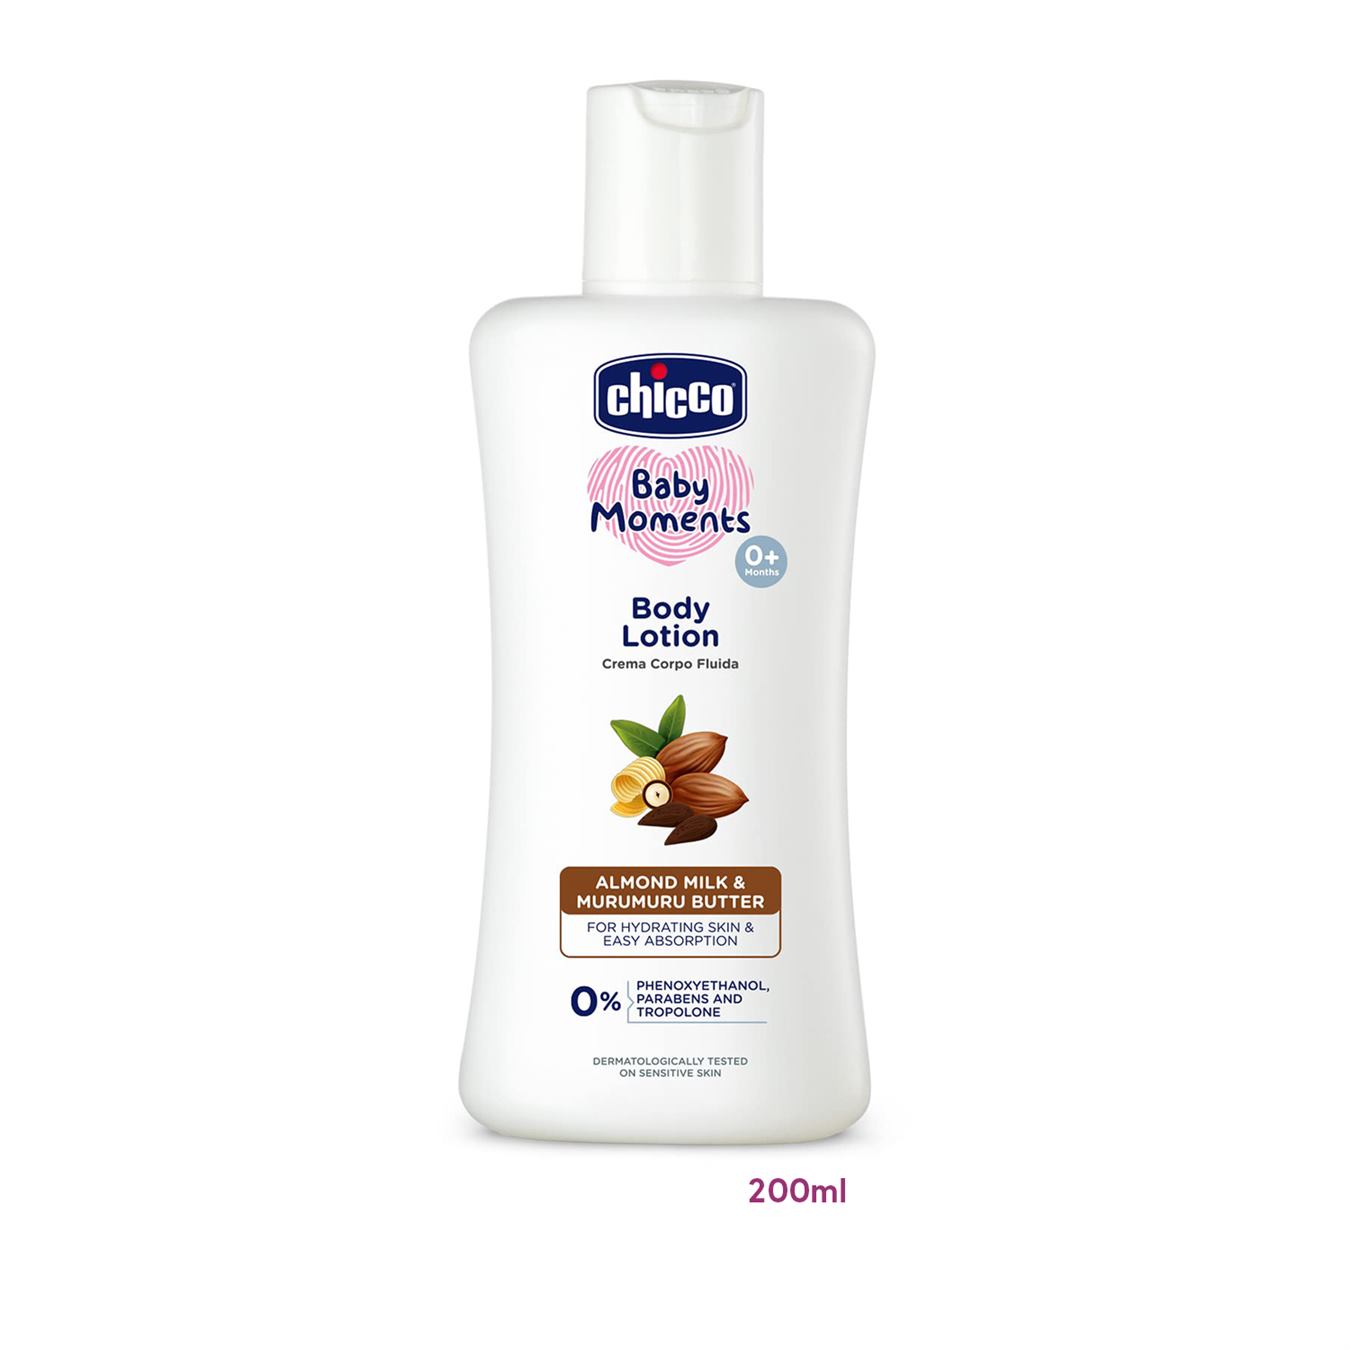 CHICCO Baby moments nourishing body lotion with almond milk